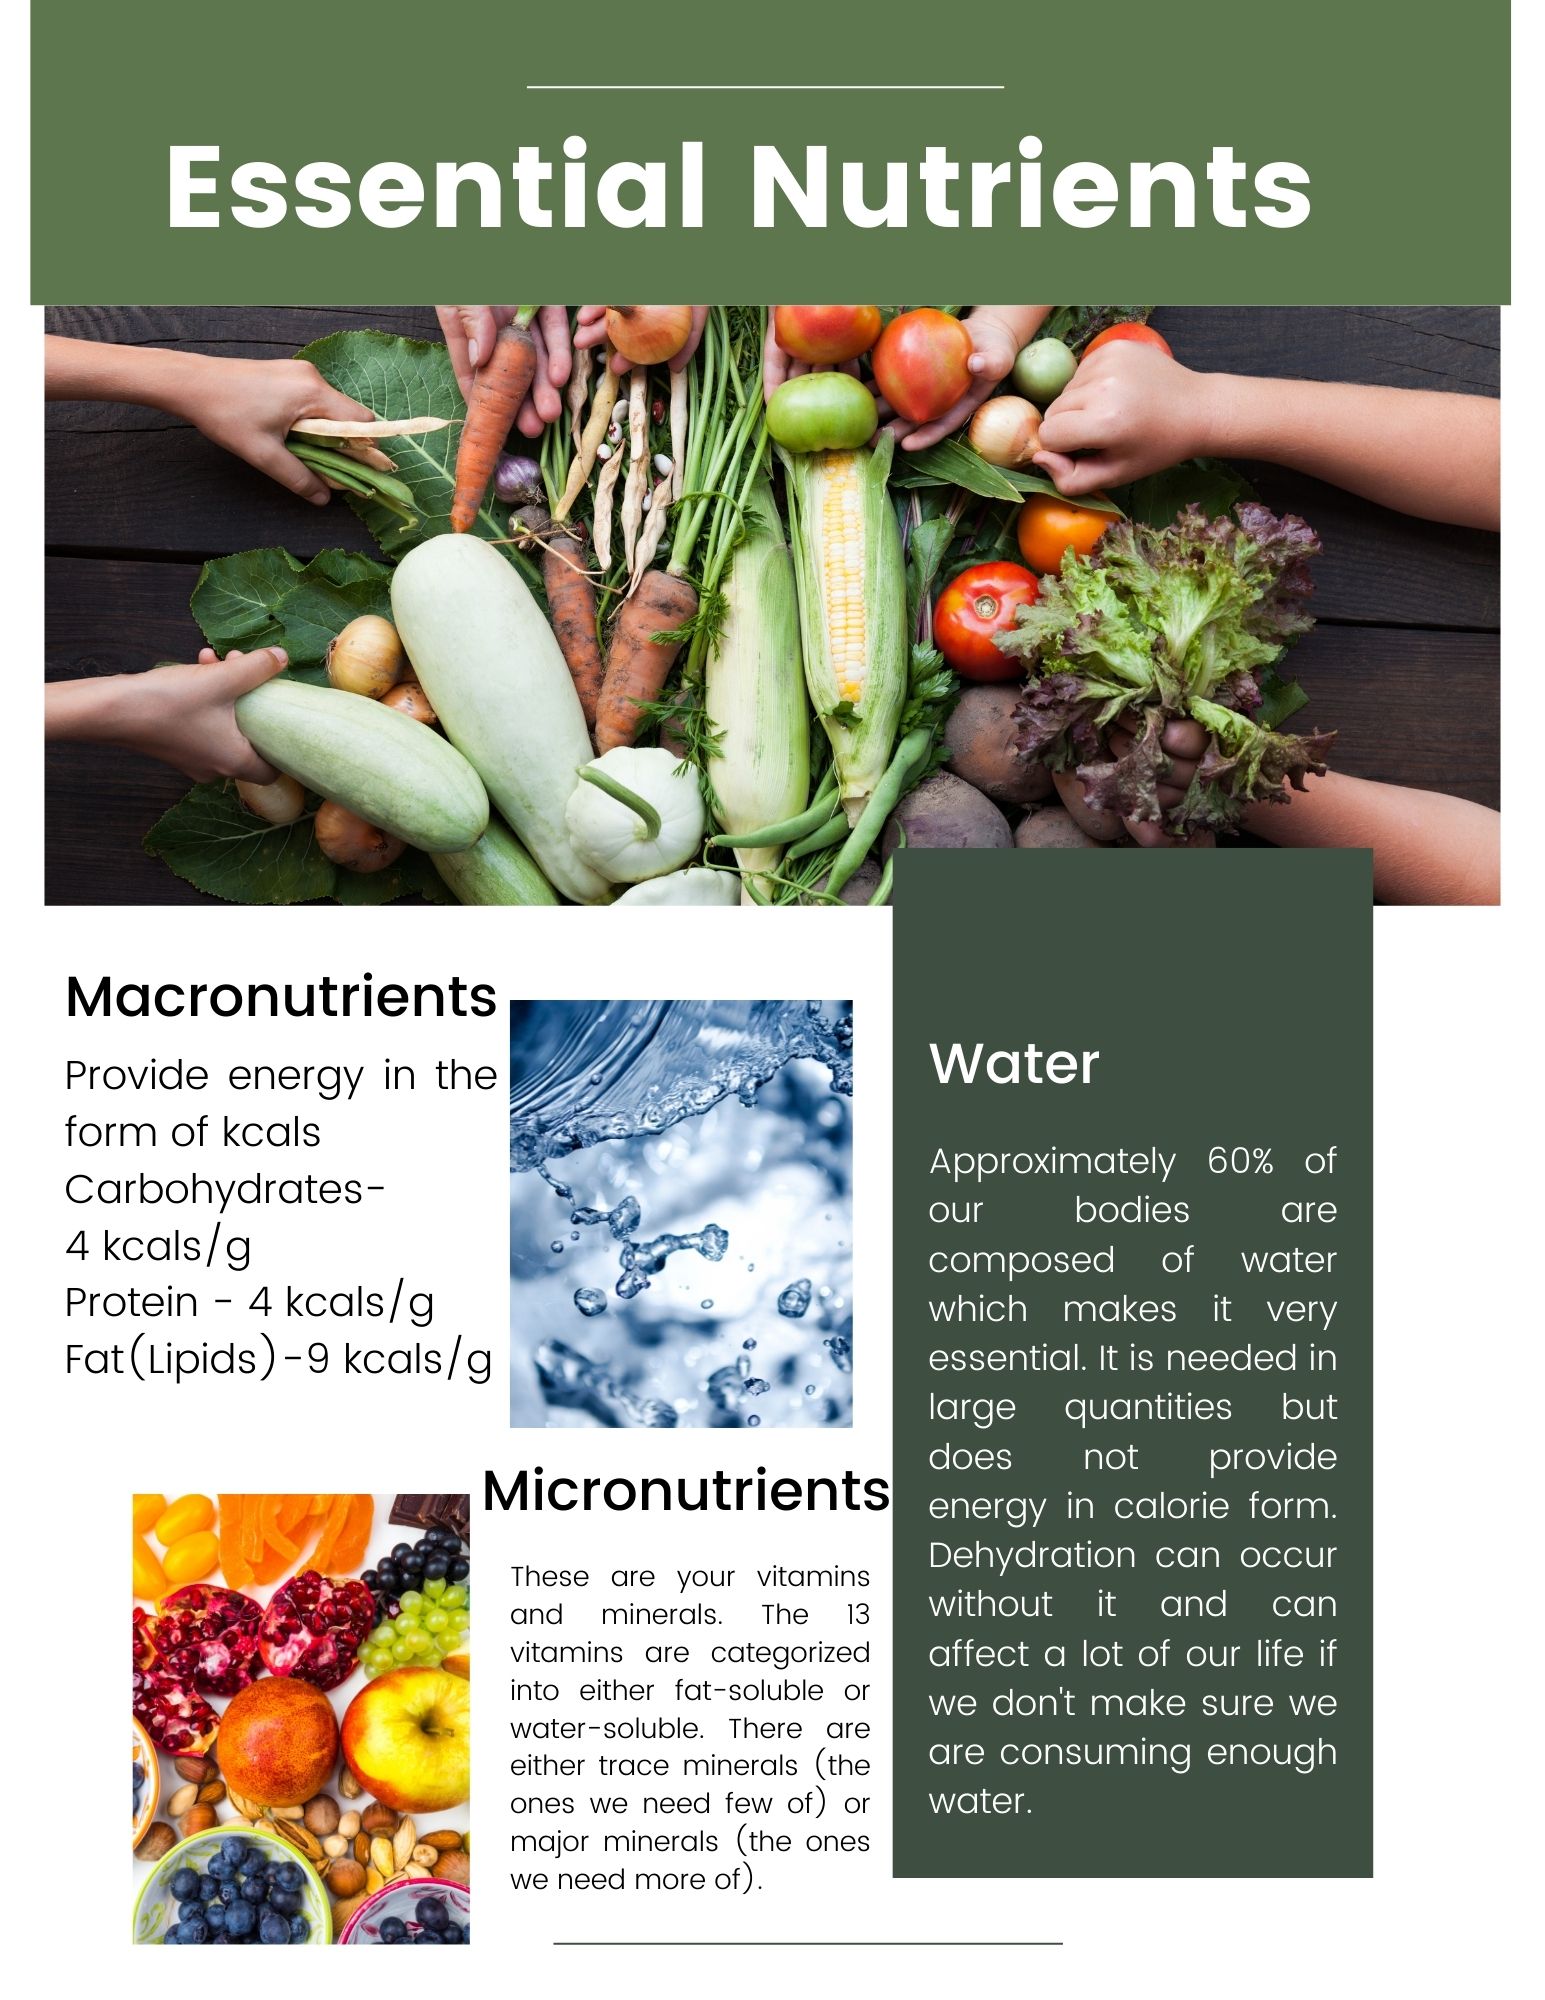 Infographic summarizing the categories of essential nutrients: macronutrients, micronutrients, and water